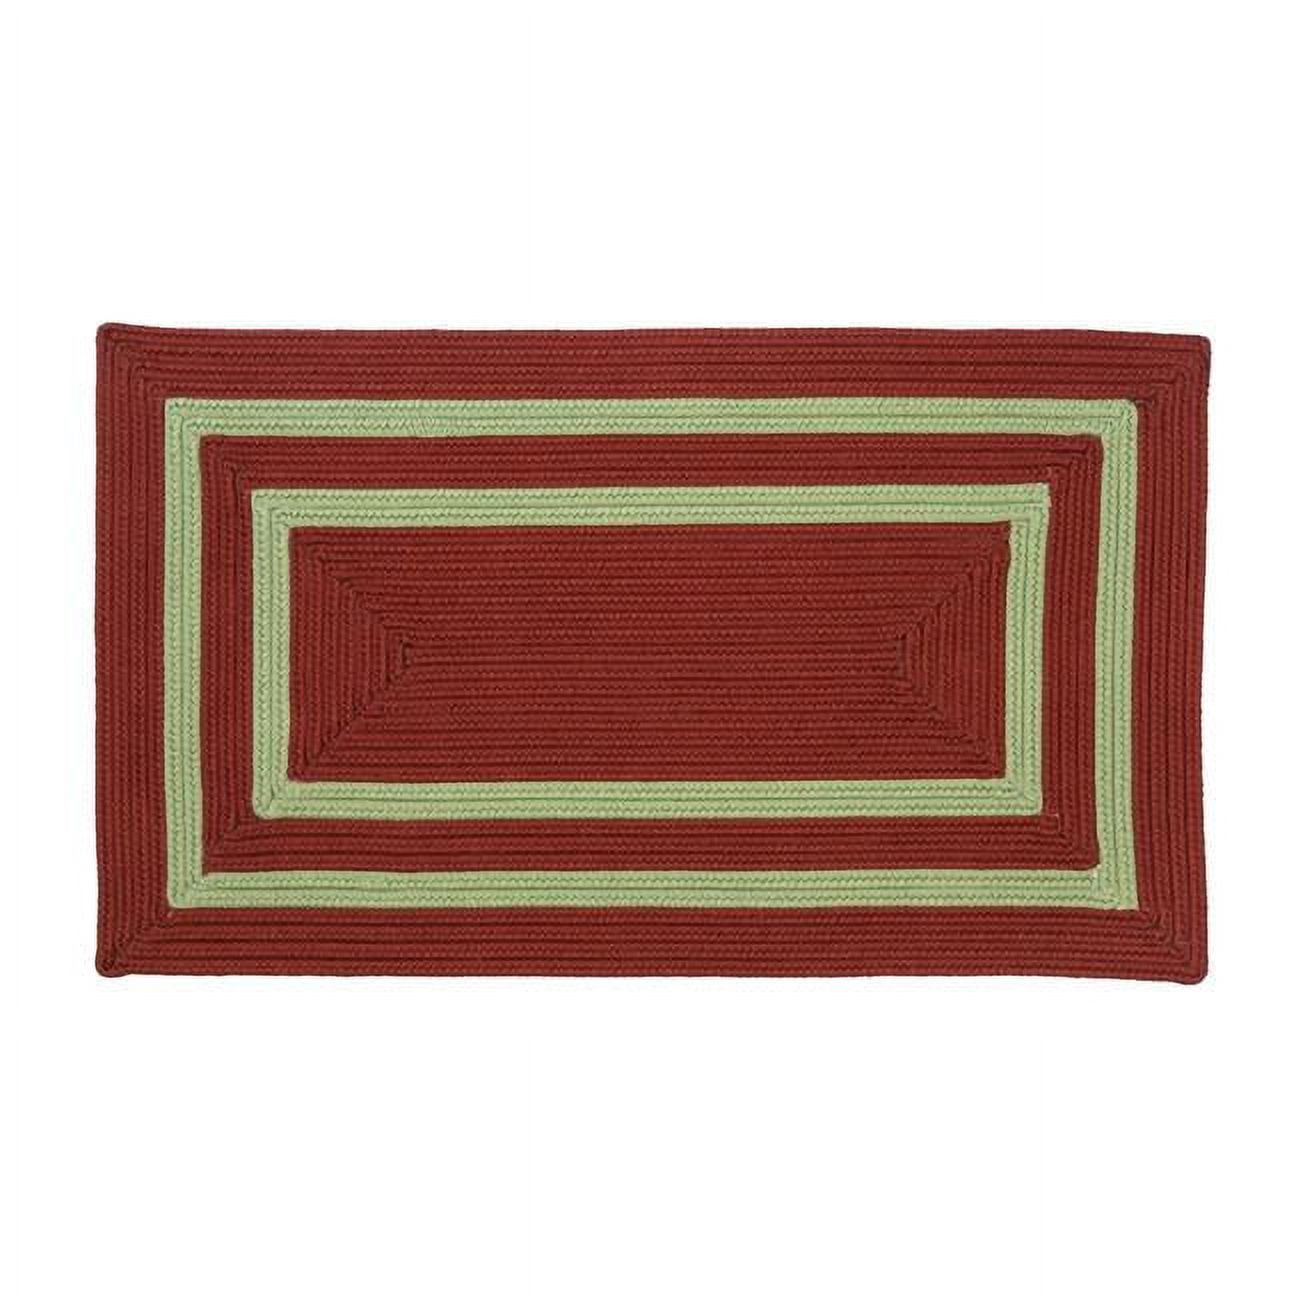 Designs-Done-Right 22 x 34 in. Double Border Christmas Rectangle Rug - Red & Green